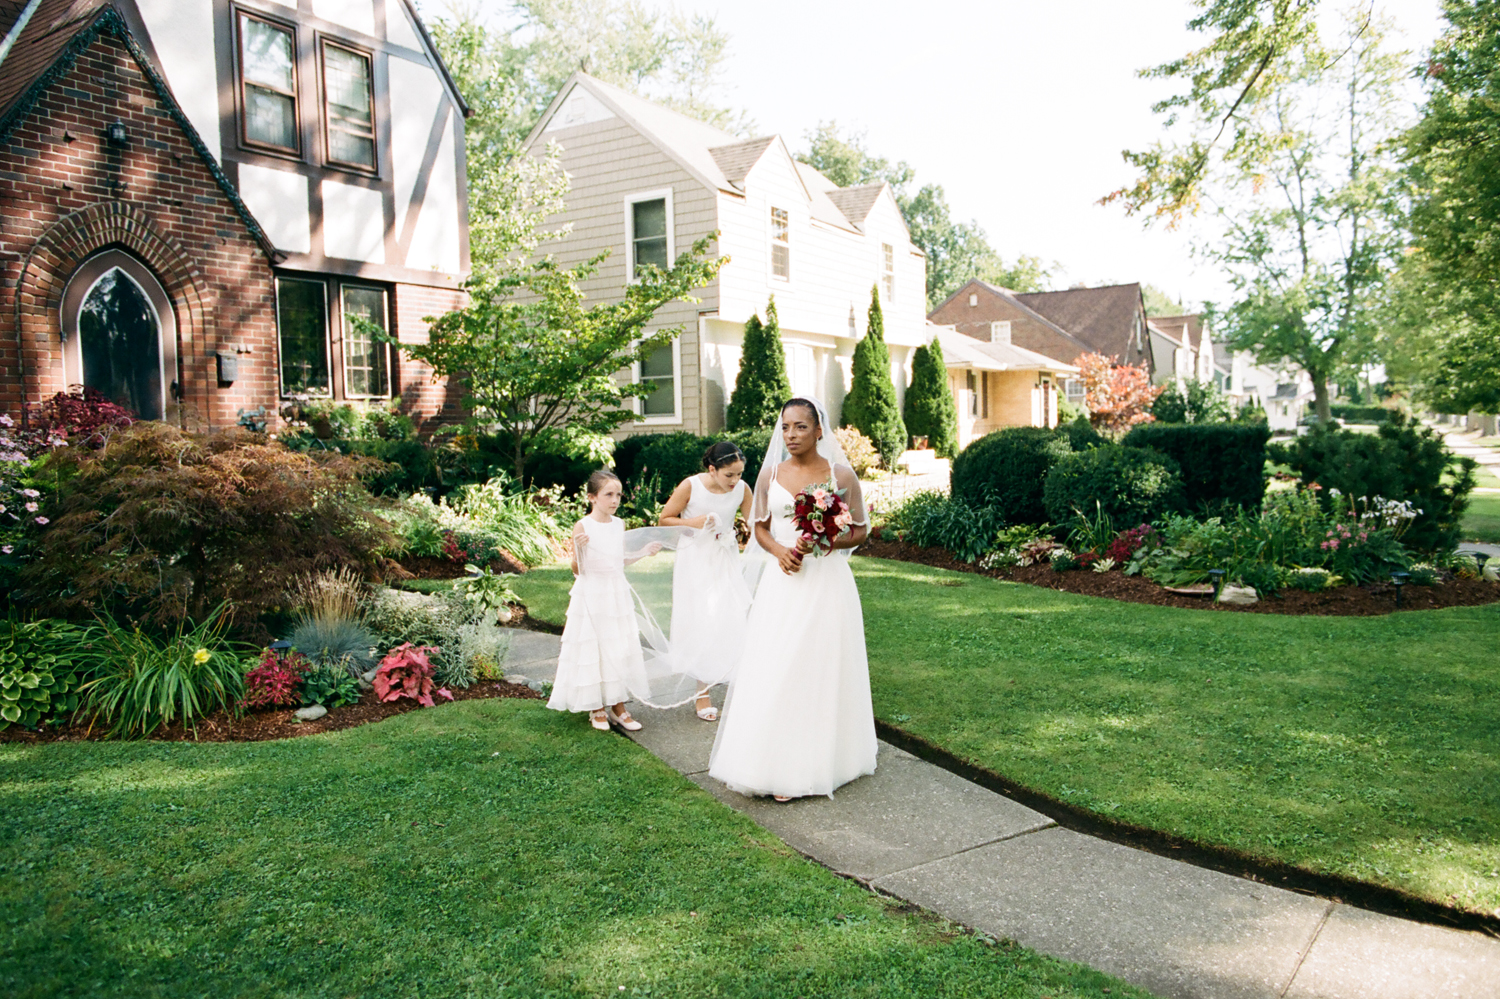 Backyard Wedding | Bride walks out front door of home with flower girls holding veil | photograph by Mary Dougherty